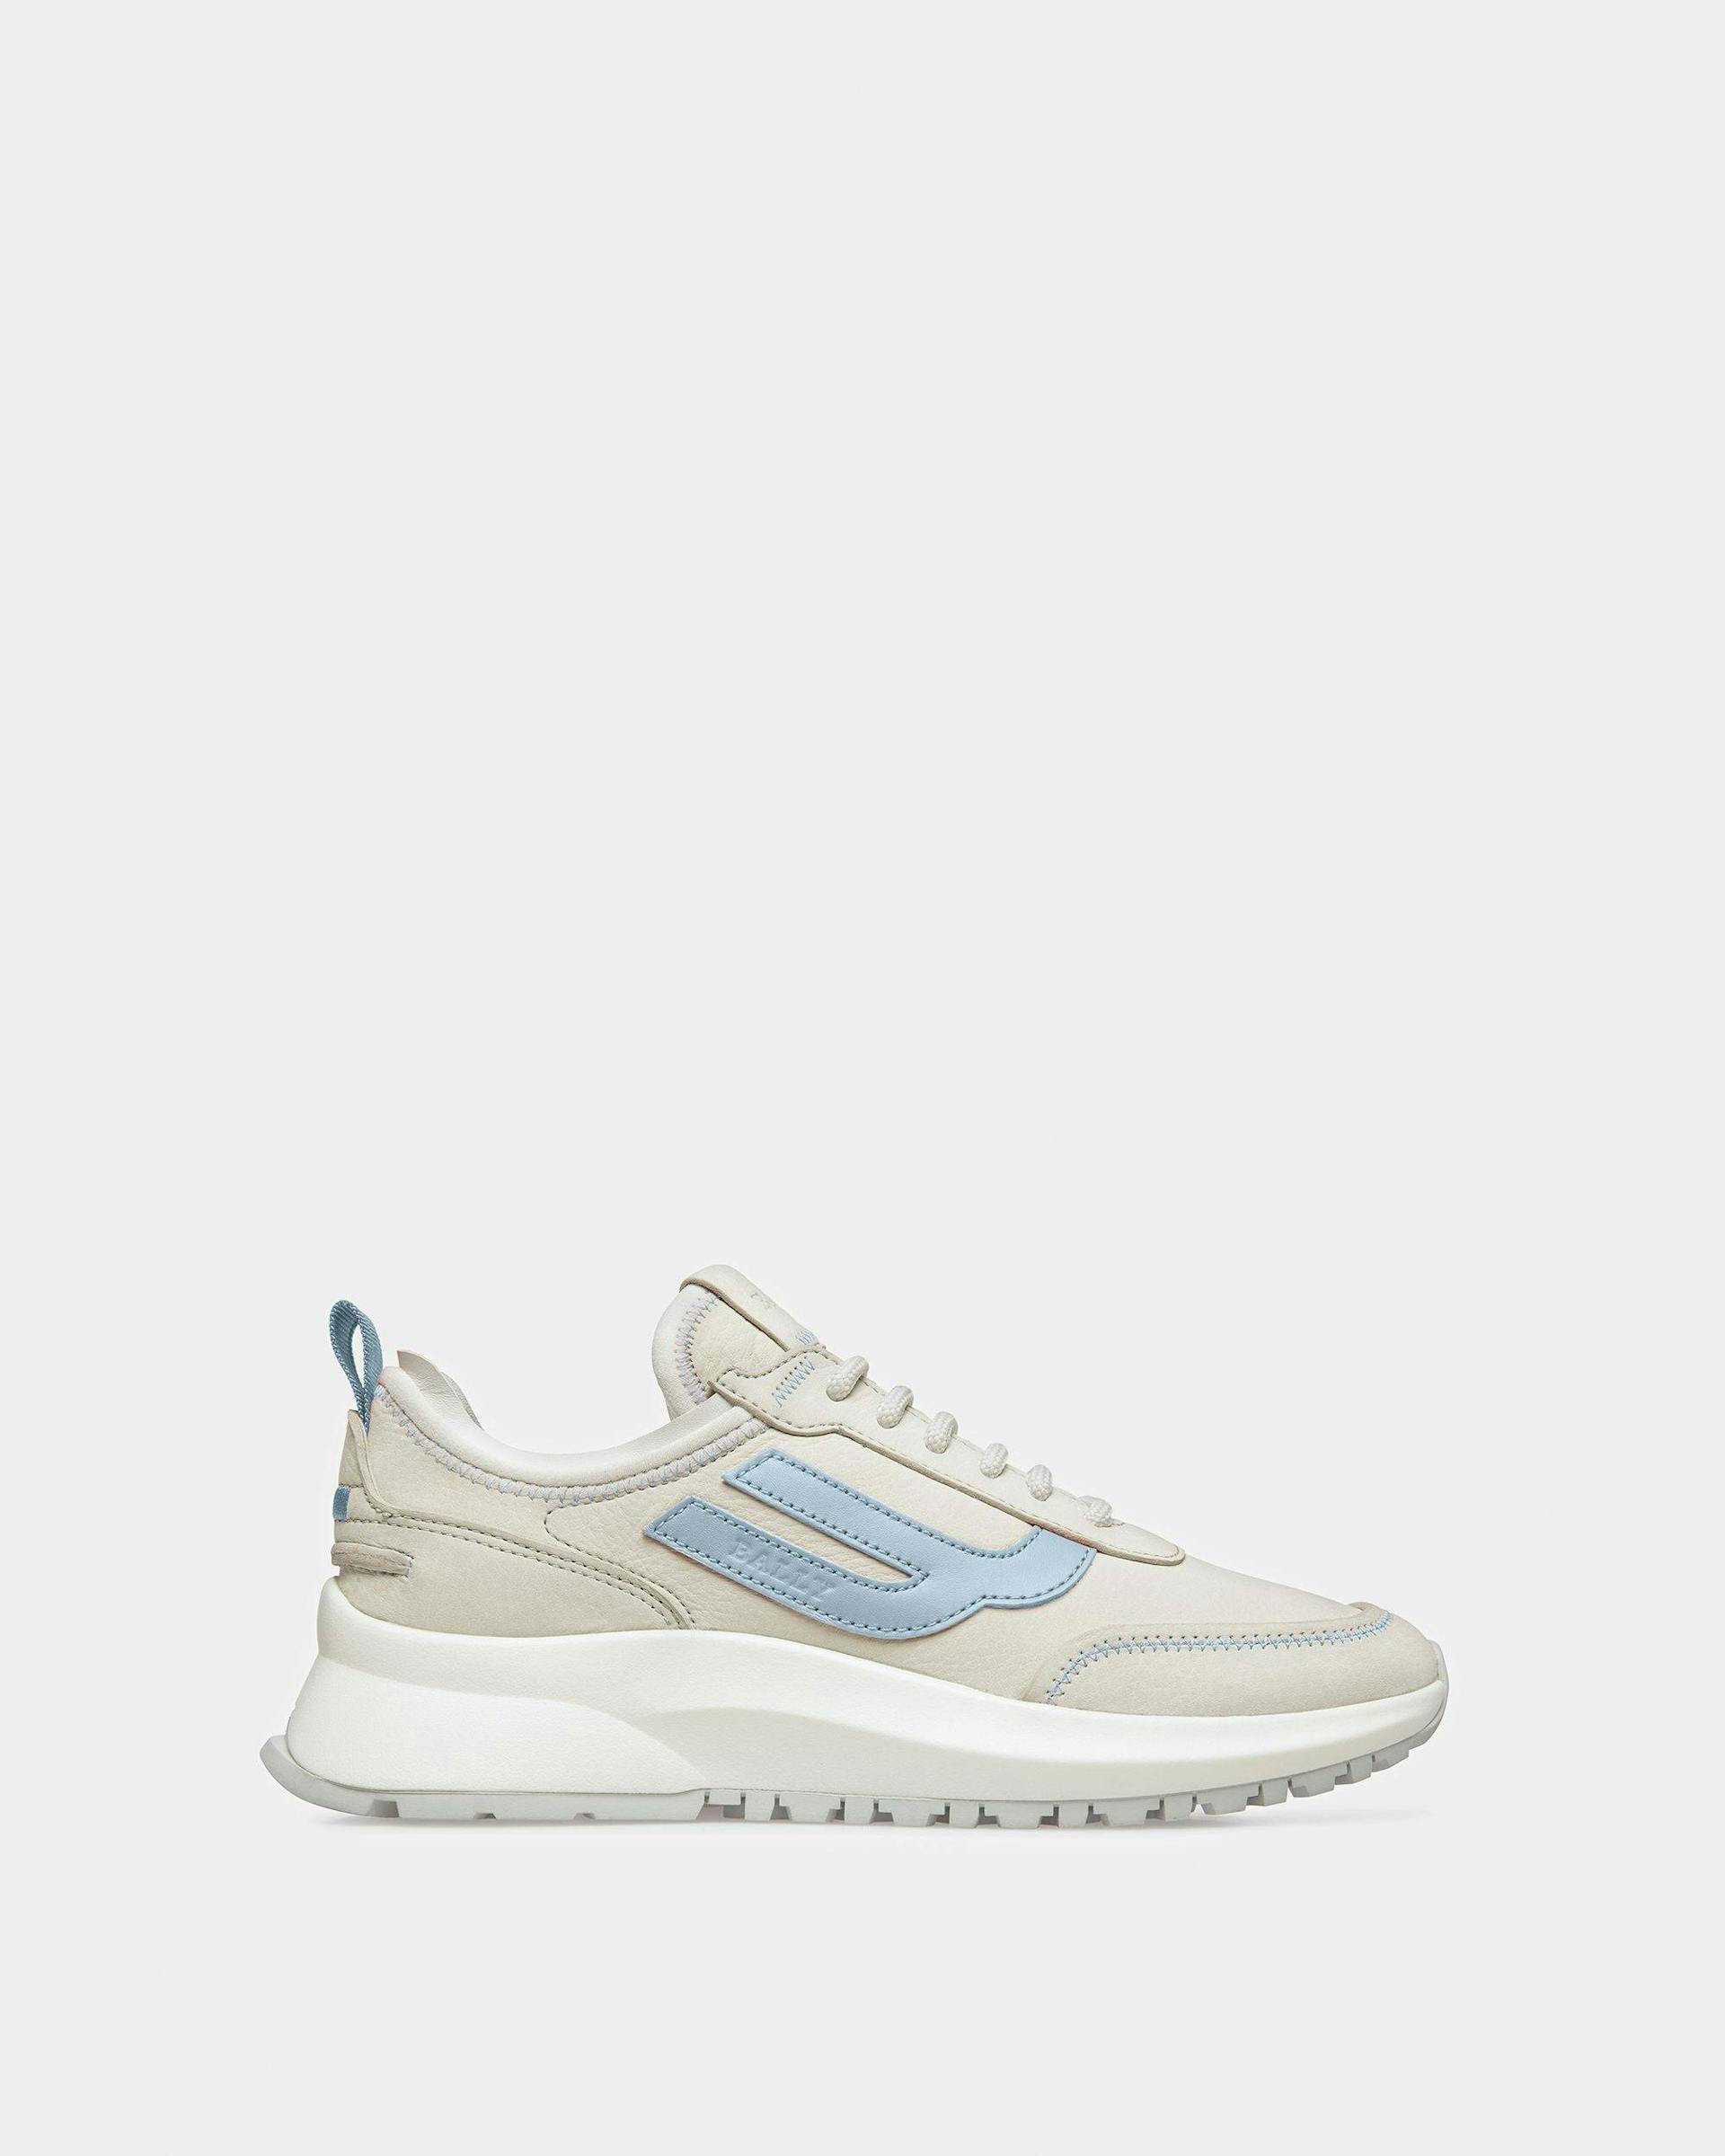 Darys Leather Sneakers In Dusty White And Light Blue - Women's - Bally - 01